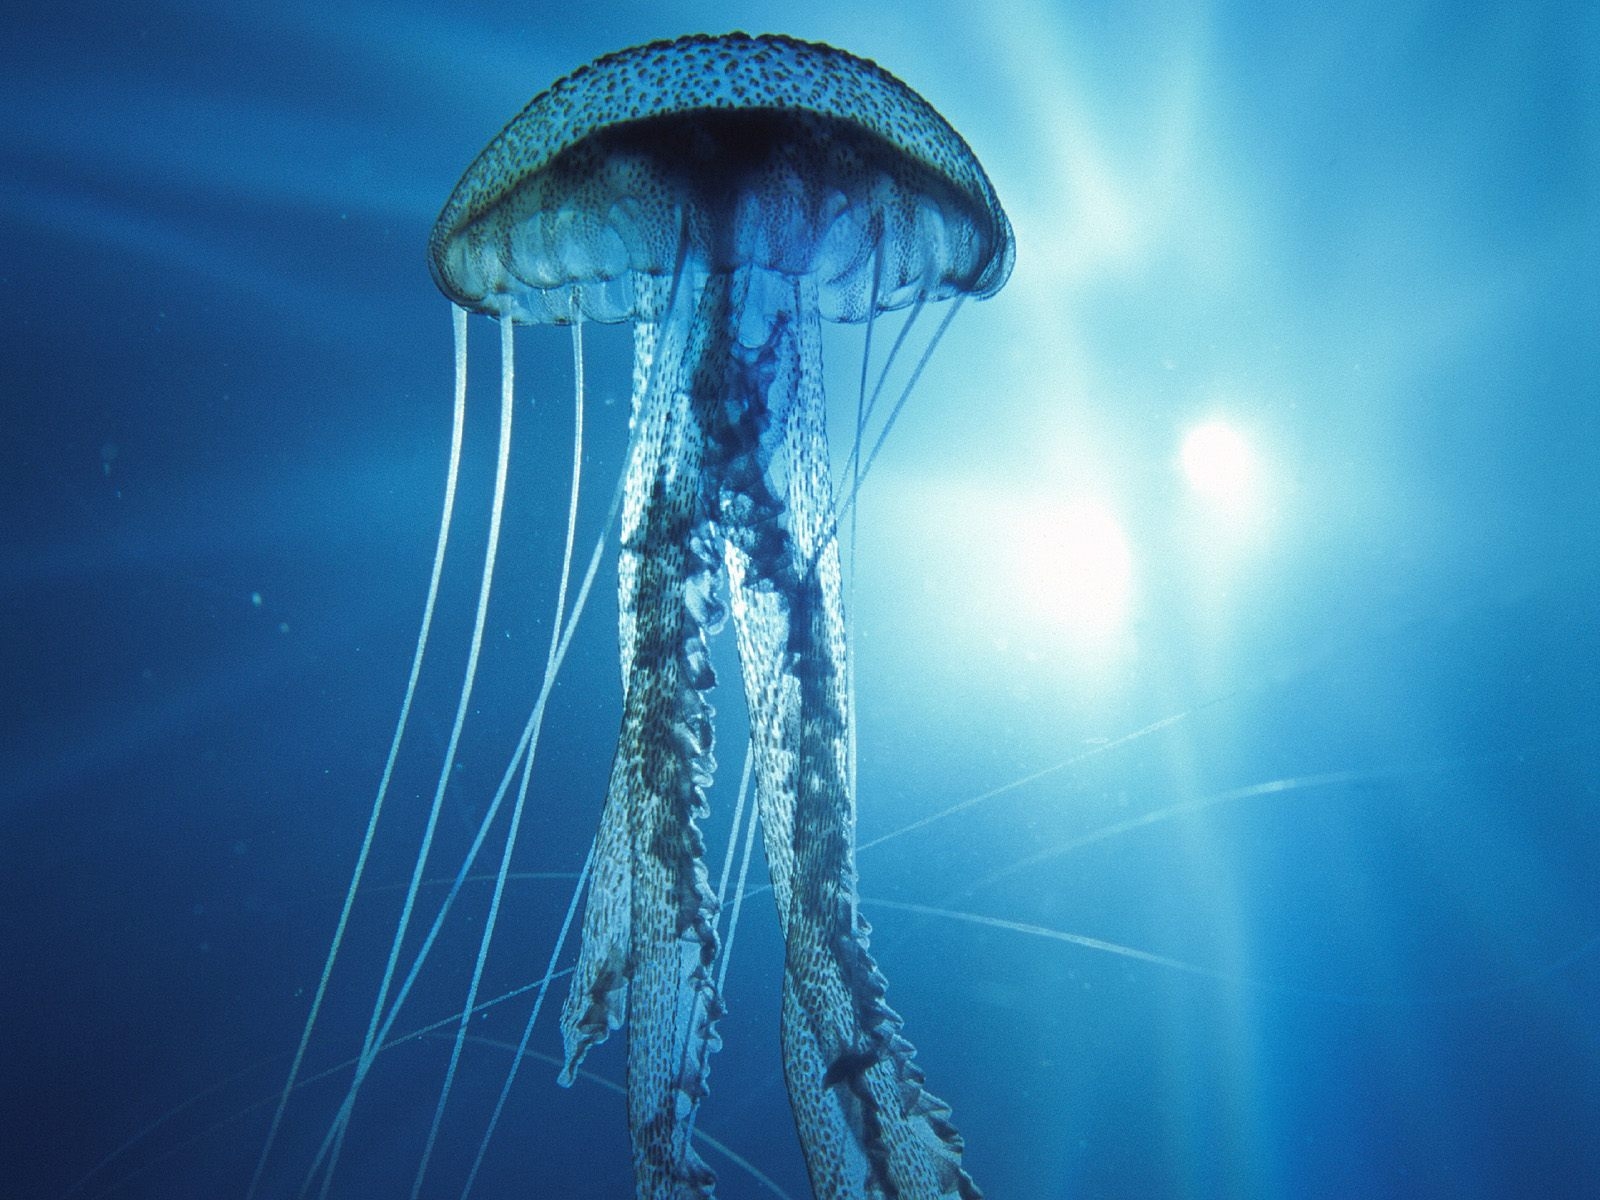  Jellyfish HQ Background Wallpapers